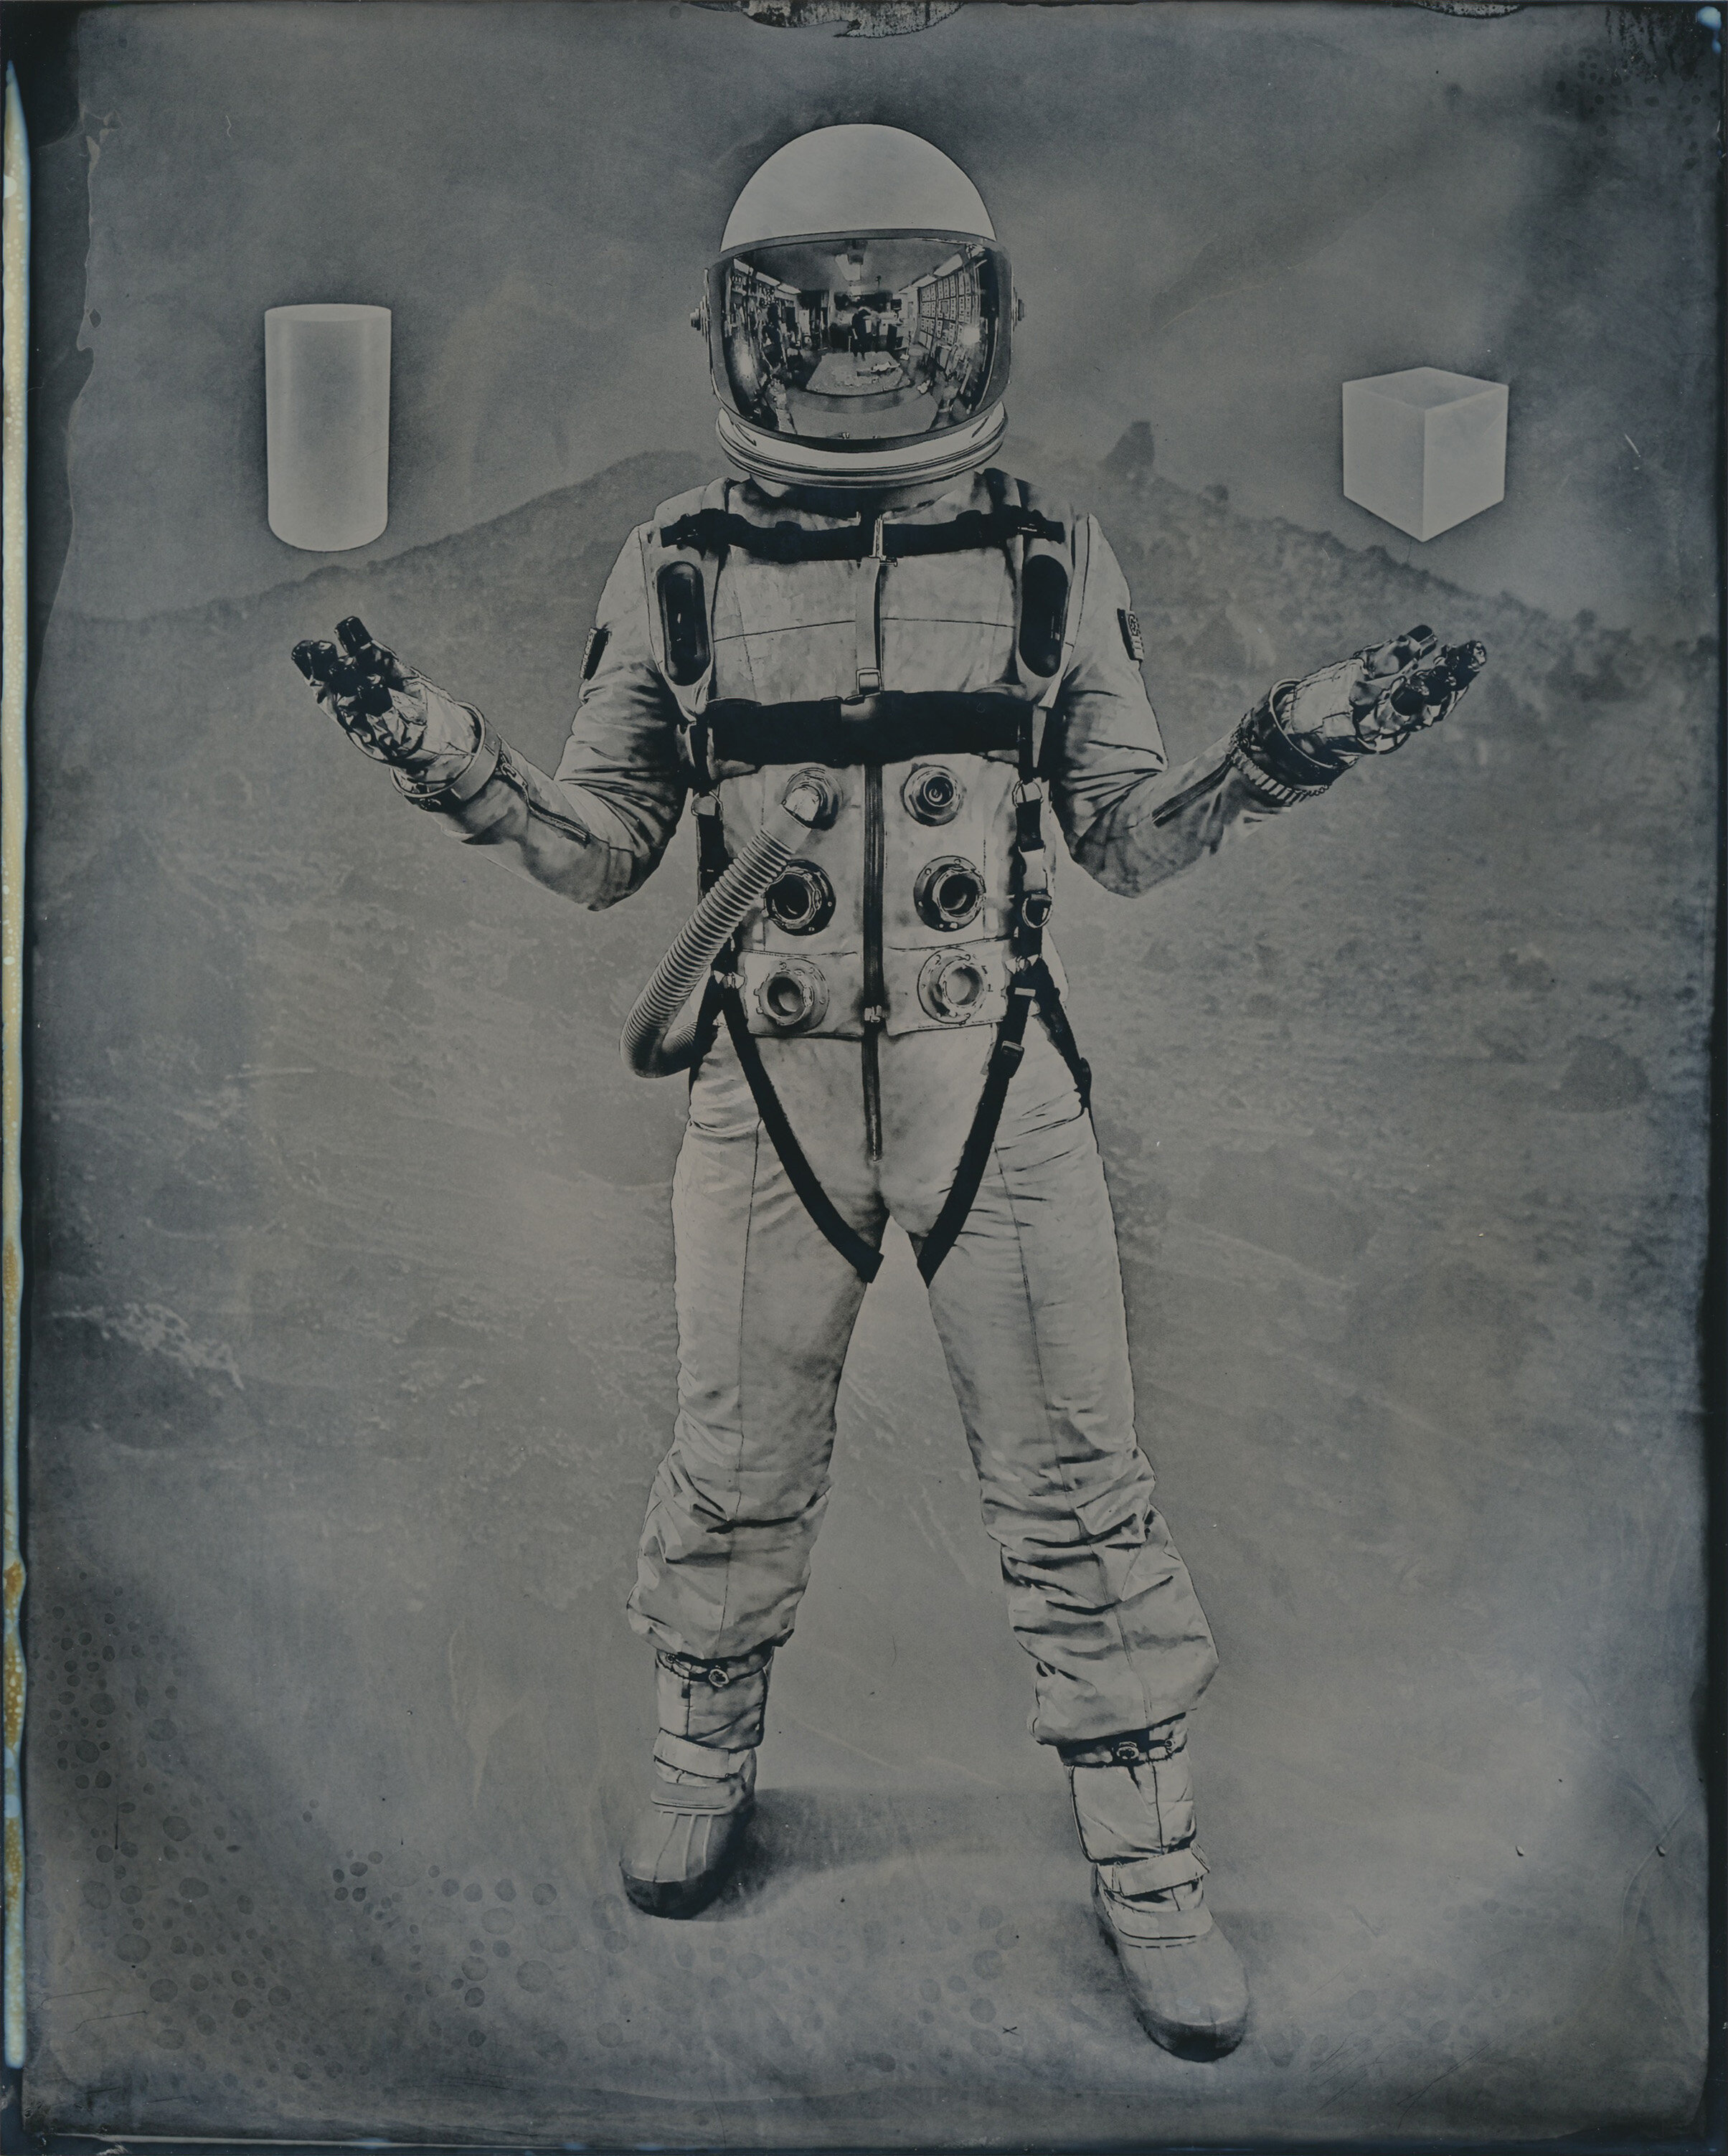   “The Return from Mount Sinai”   2020  Wet Plate Collodion  8x10 